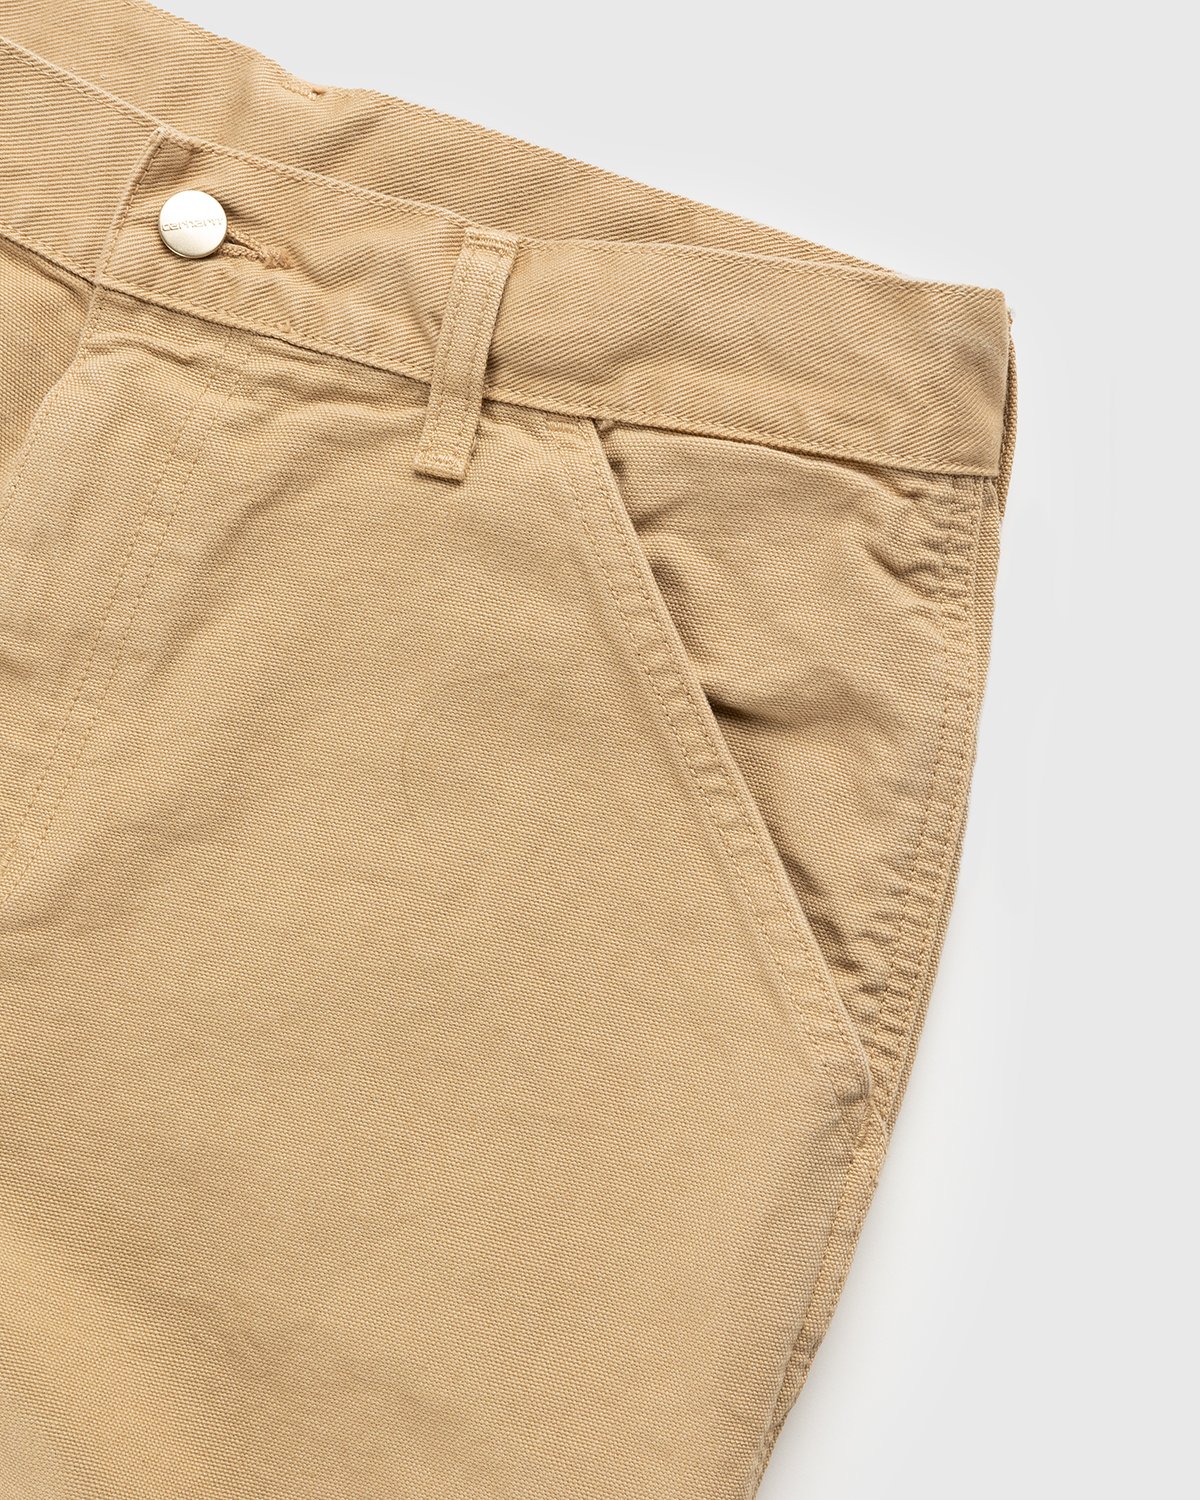 Carhartt WIP - Medley Pant Dusty Hamilton Brown Garment Dyed - Clothing - Brown - Image 8